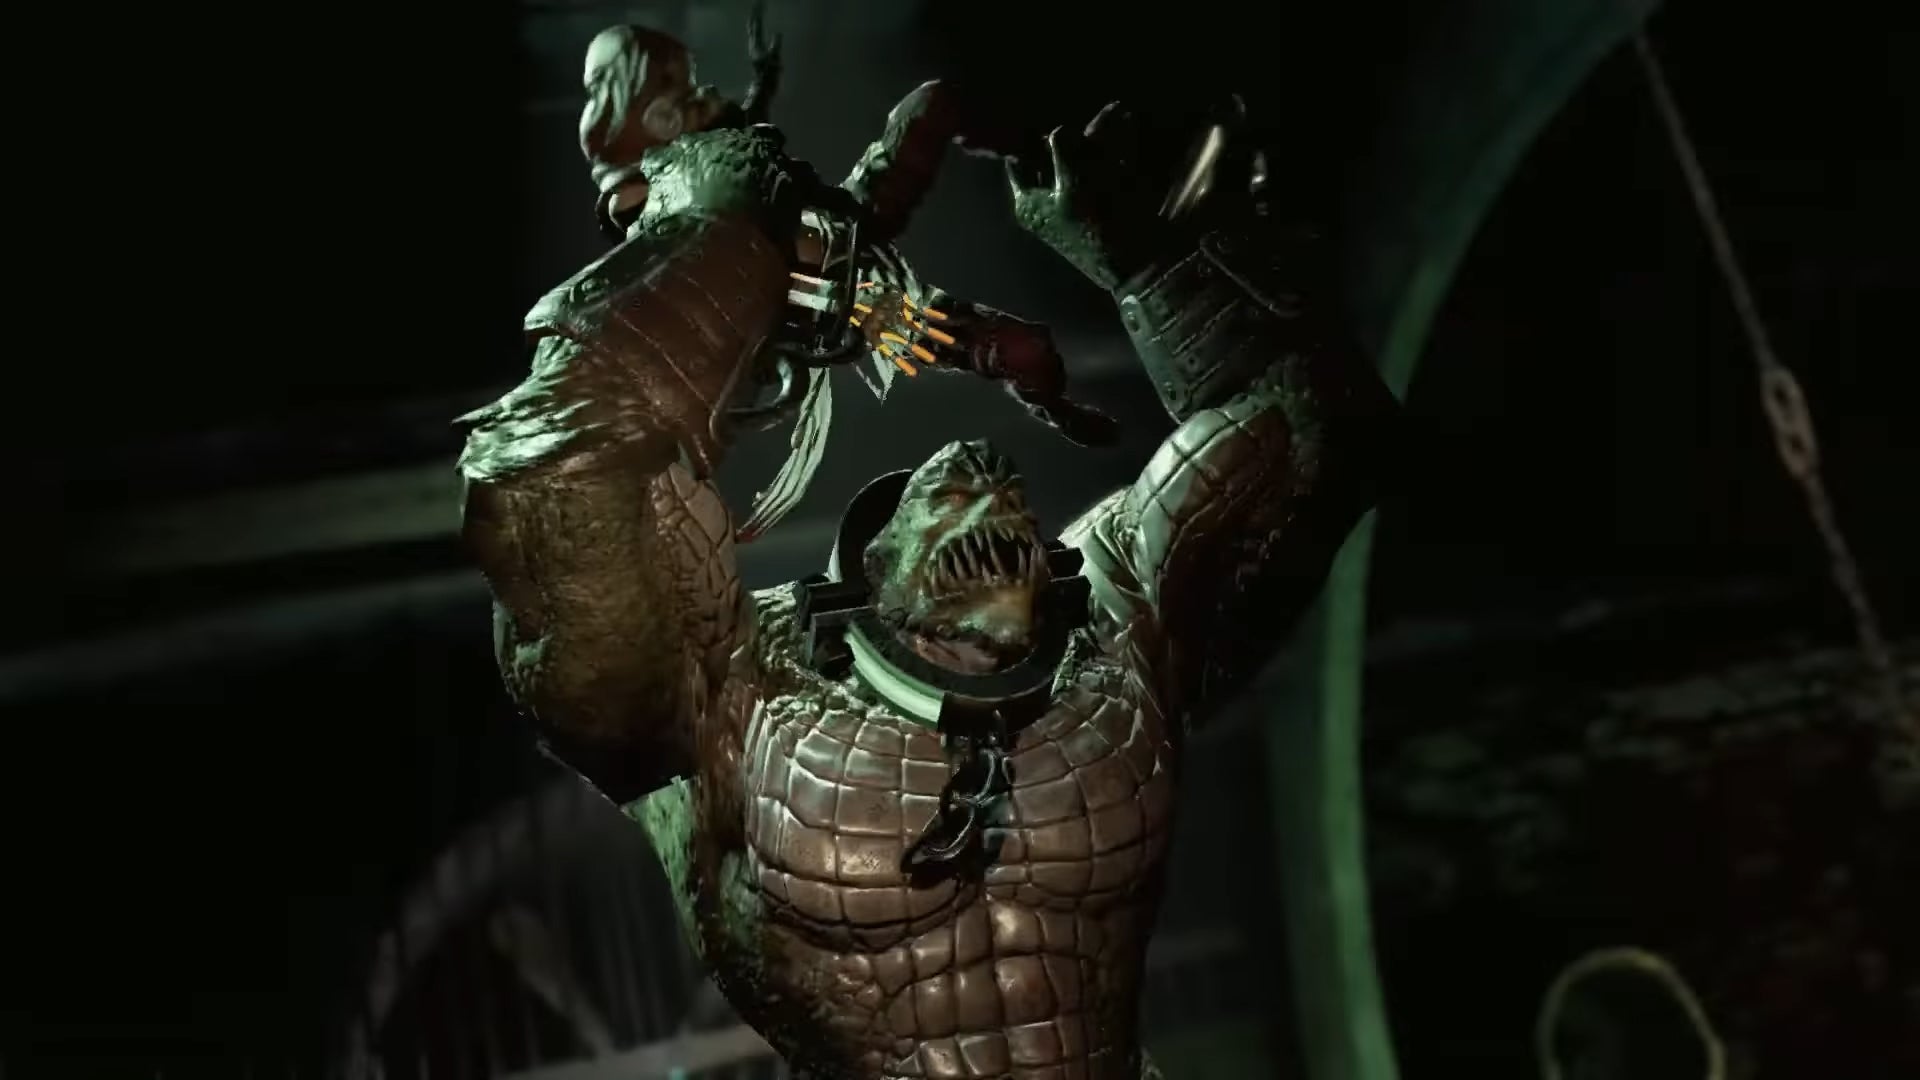 Killer Croc lifts Scarecrow up into the air in the sewers in Batman Arkham Asylum.